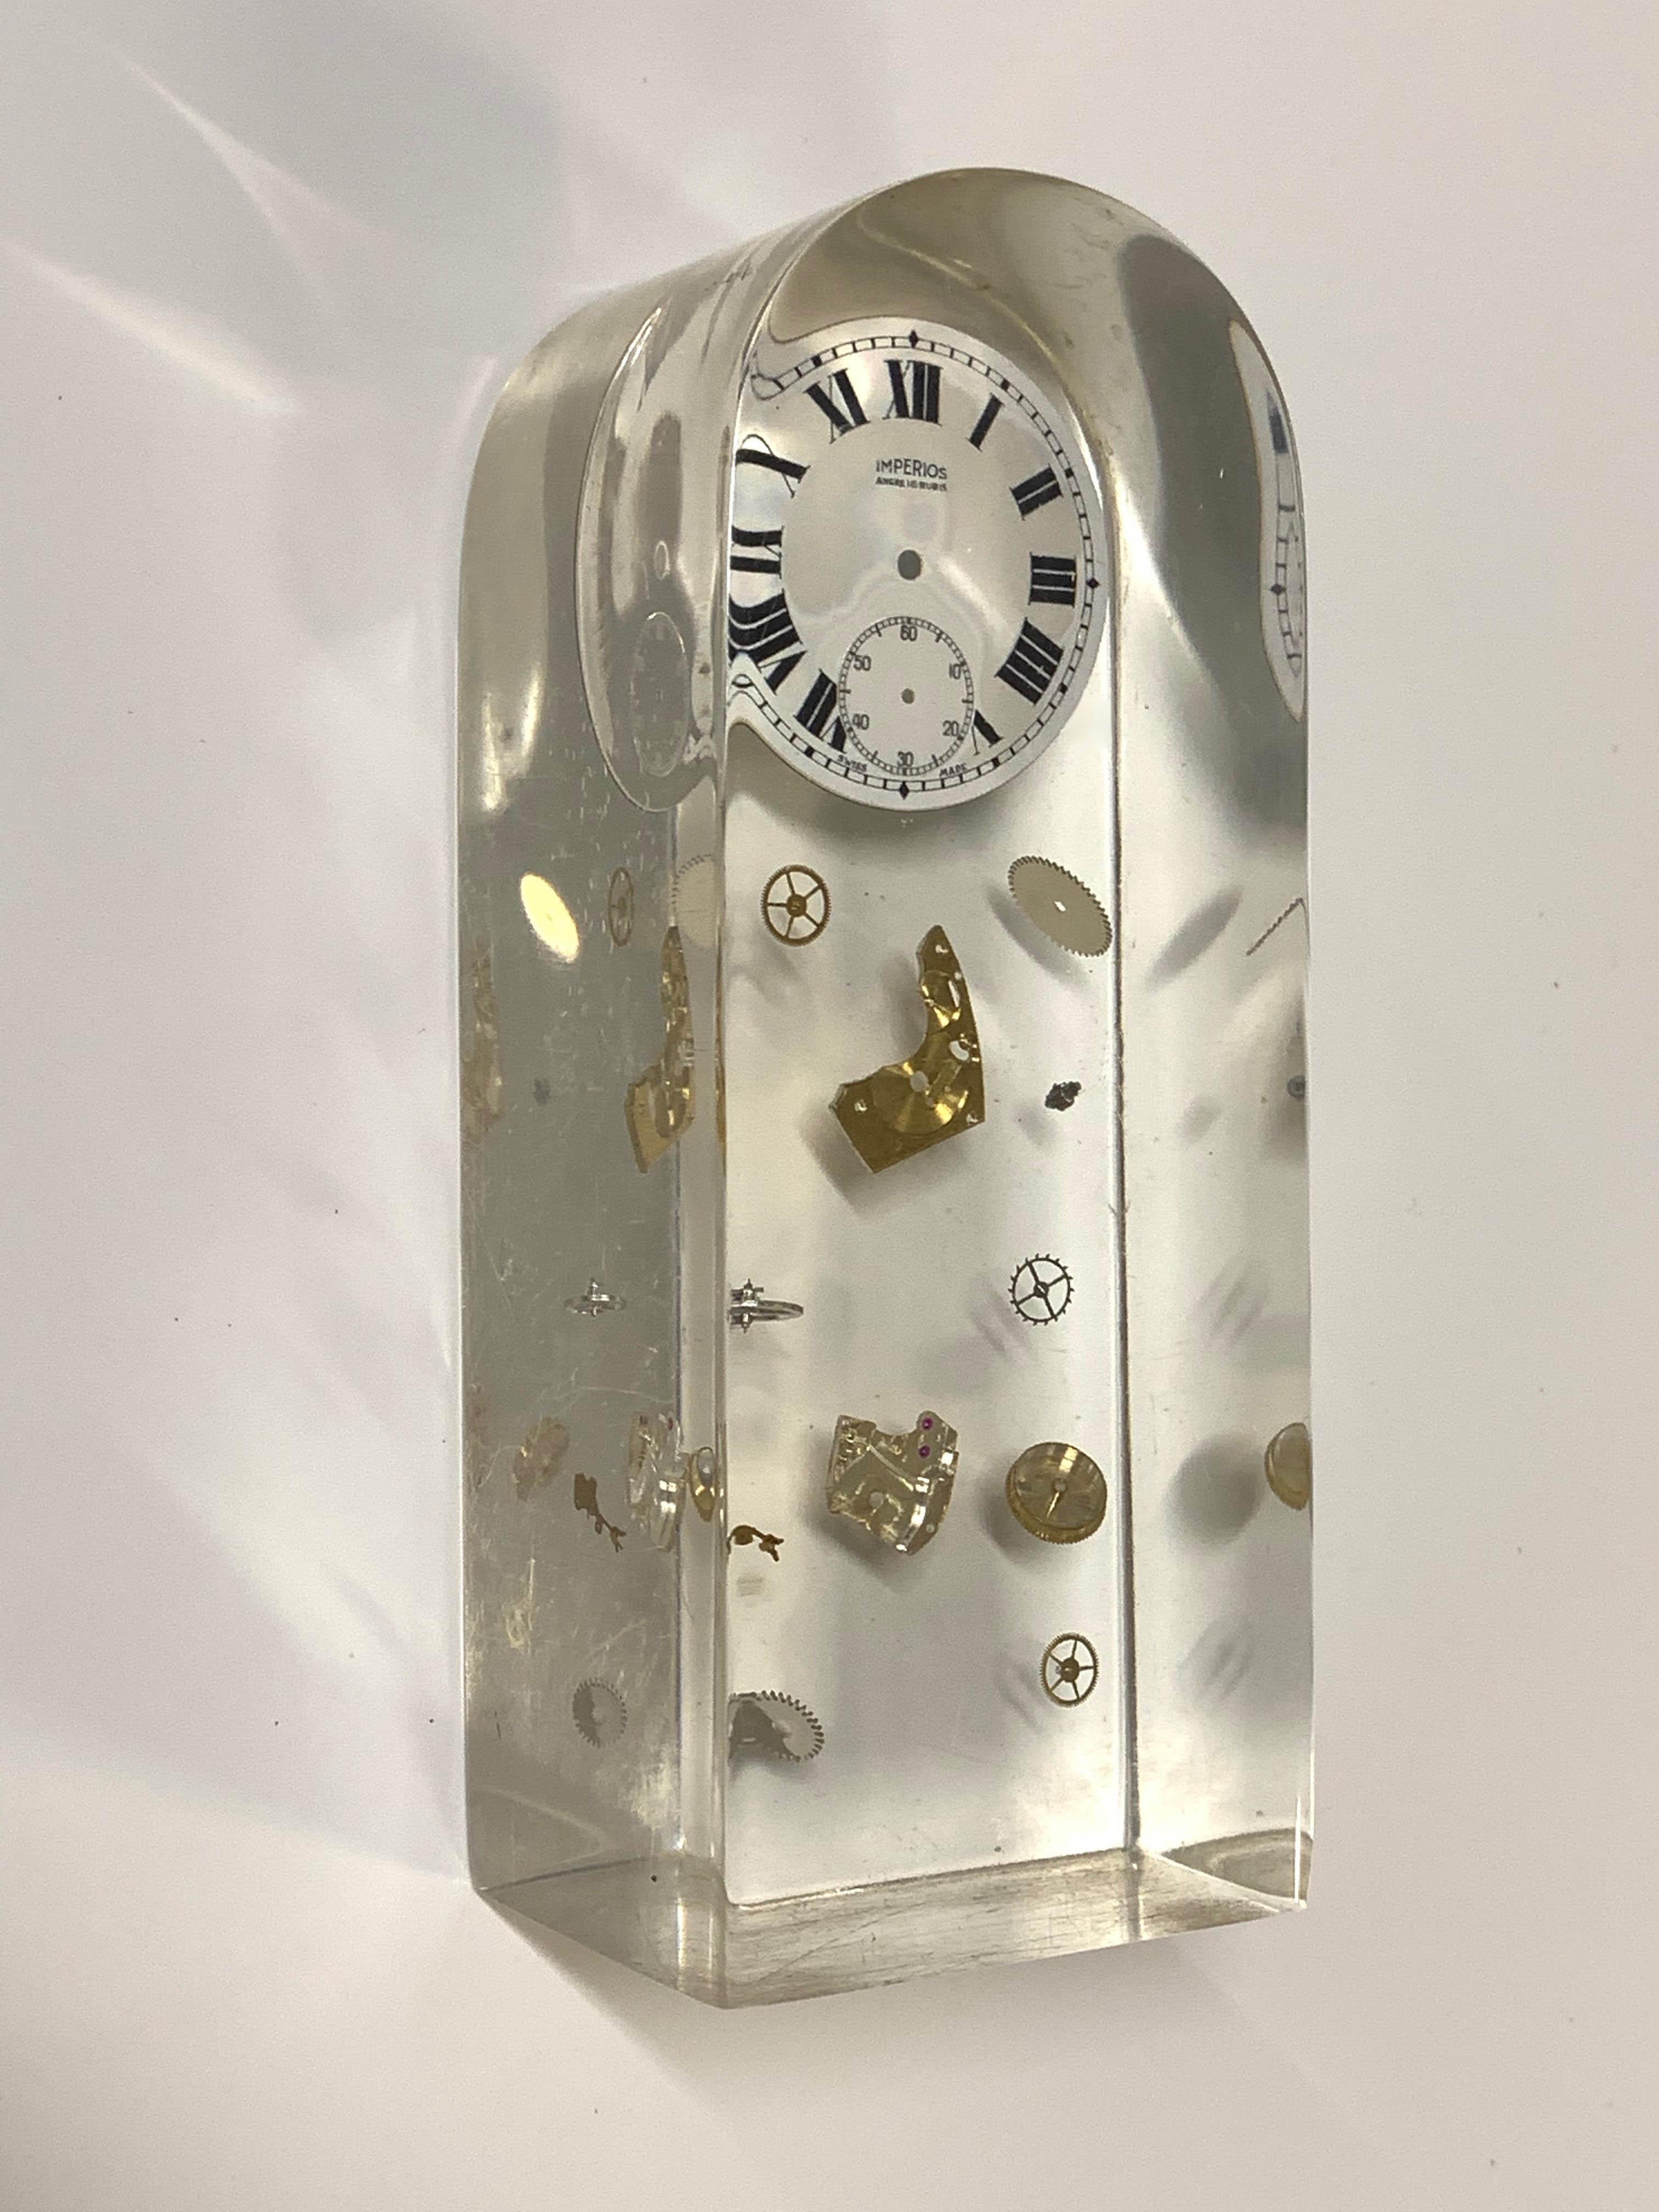 Rare cubic Lucite resin exploded sculpture clock. This piece was designed by Pierre Giraudon in France during the 1970s.

This item is amazing as it is an exploded clock sculpture, with all the components floating in crystal Lucite resin with an